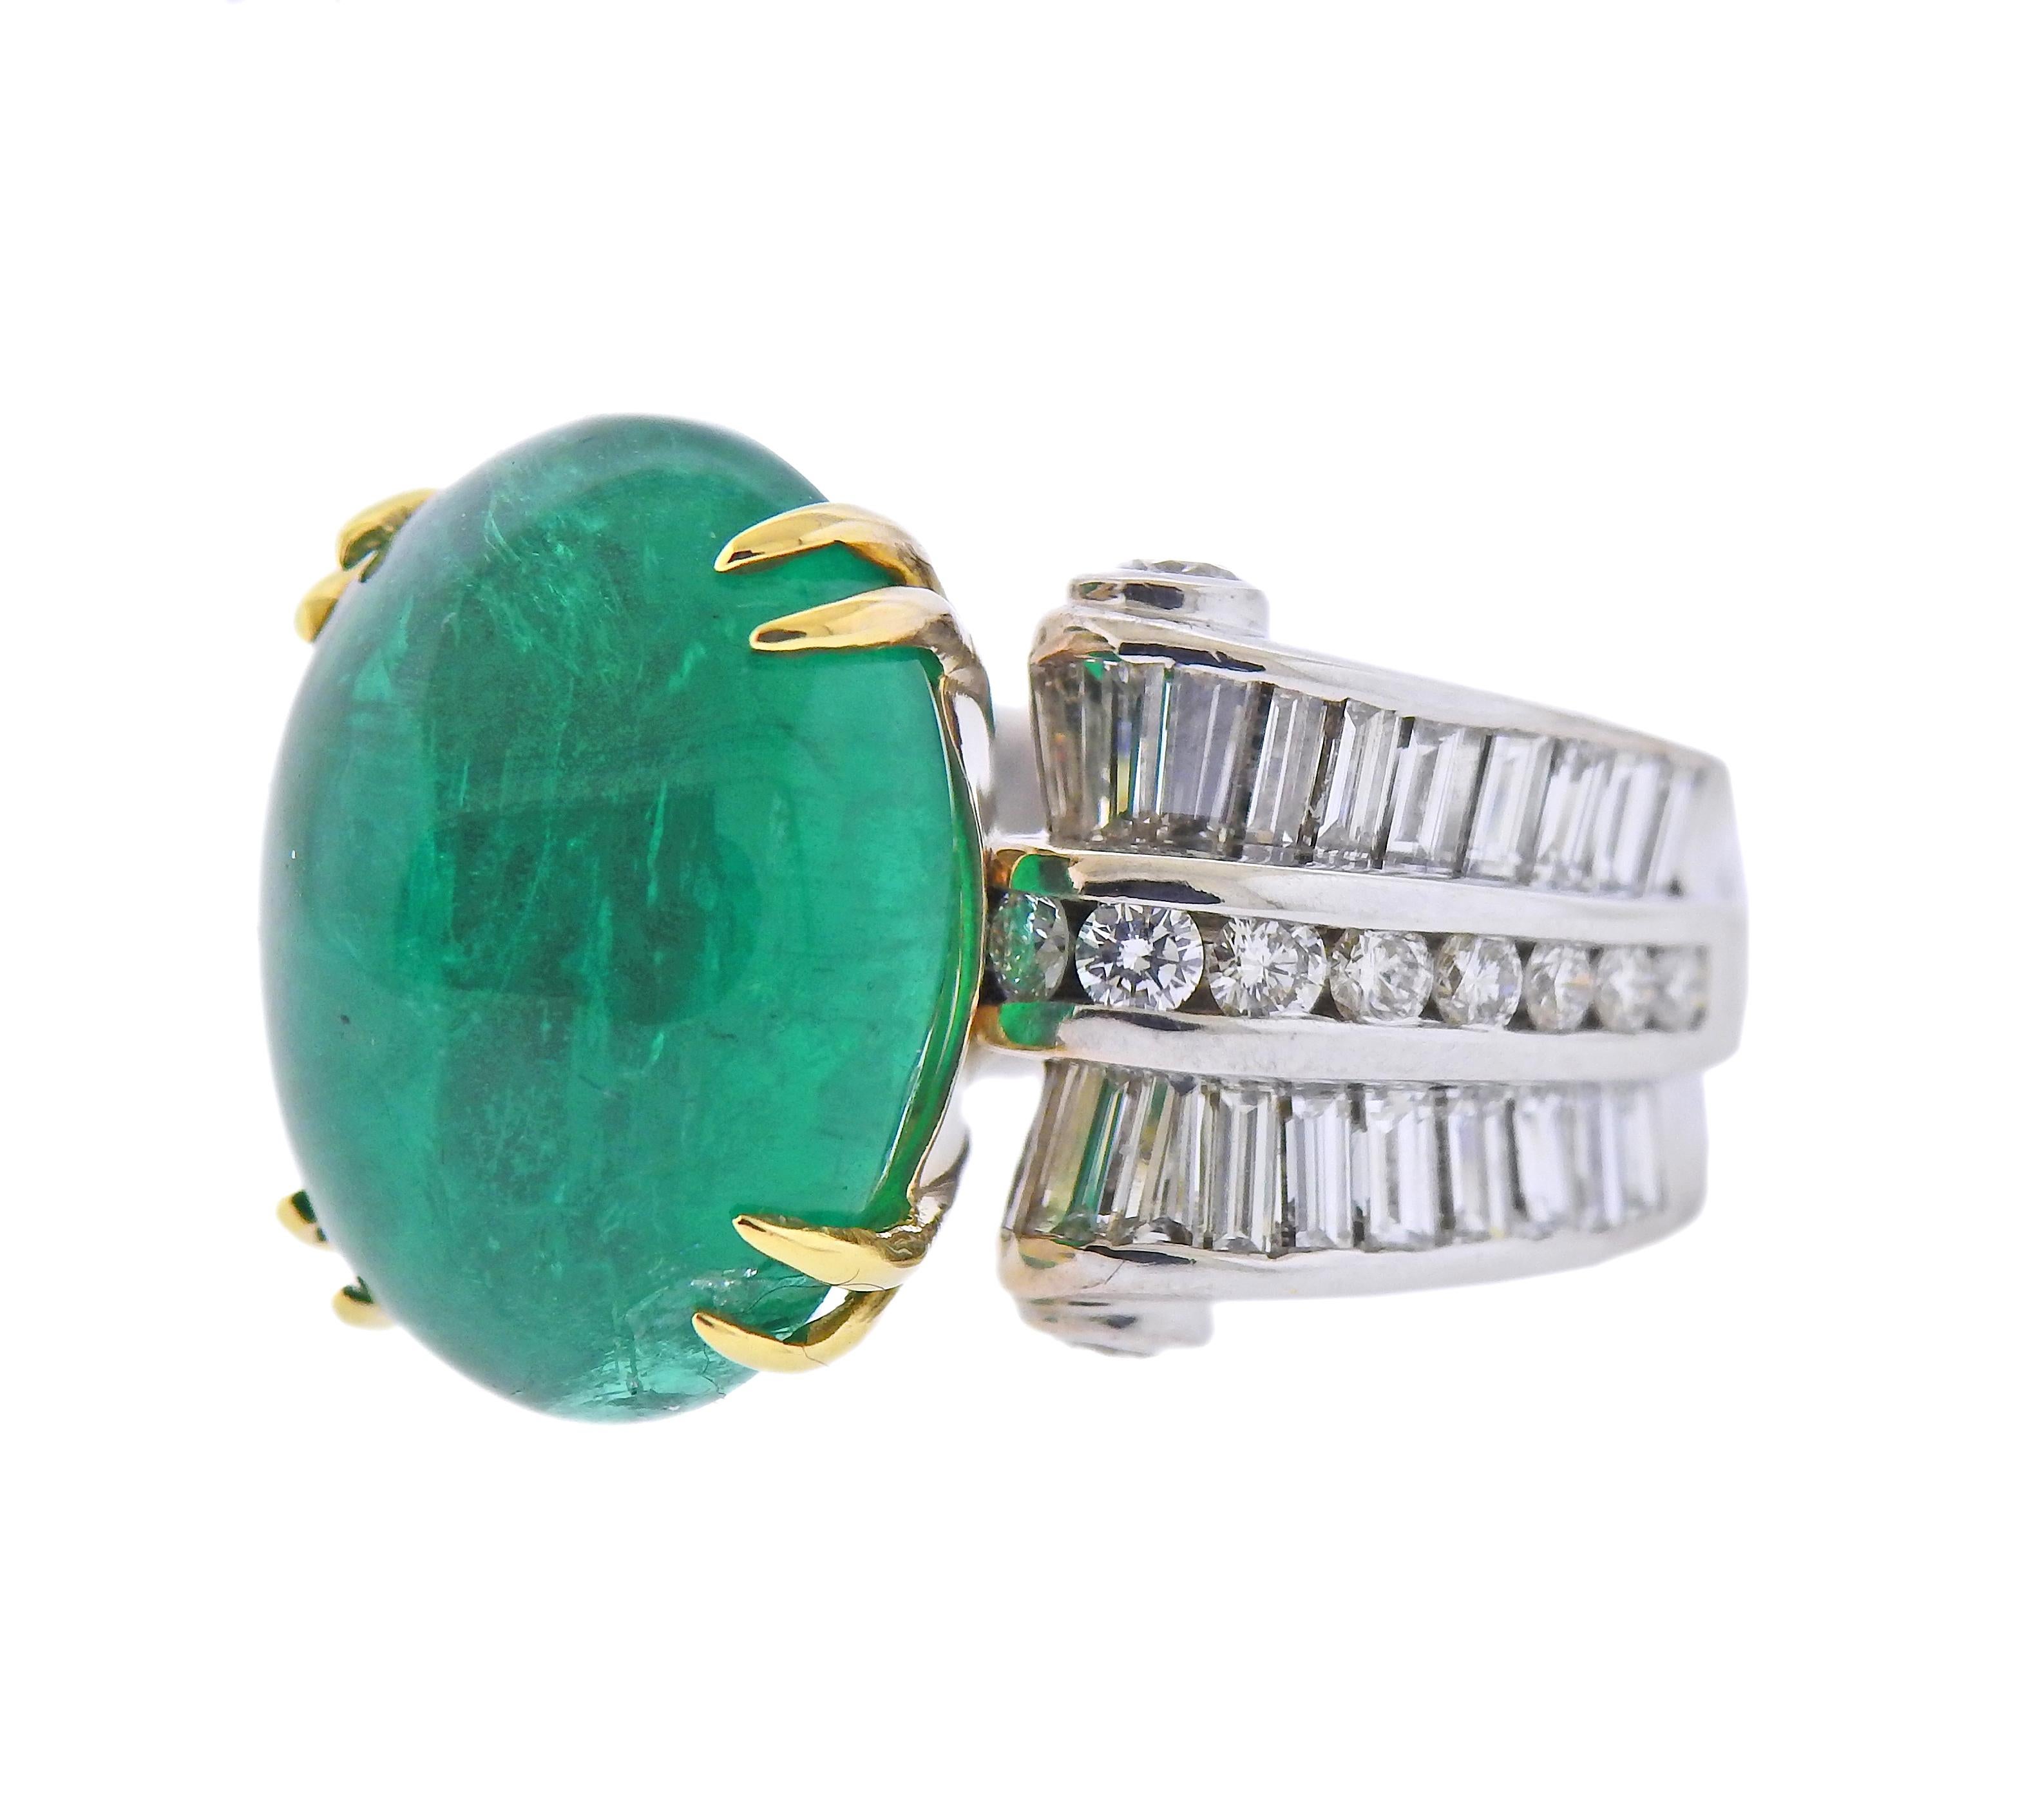 18k gold ring by Charles Krypell, with center approx. 20ct emerald cabochon (has chip under one prong) , measuring 17.1 x 13.4 x 9.8mm, surrounded with approx. 1.50ctw in diamonds. Ring size - 6.5, ring top is 17mm wide. Marked: Krypell 750. Weight